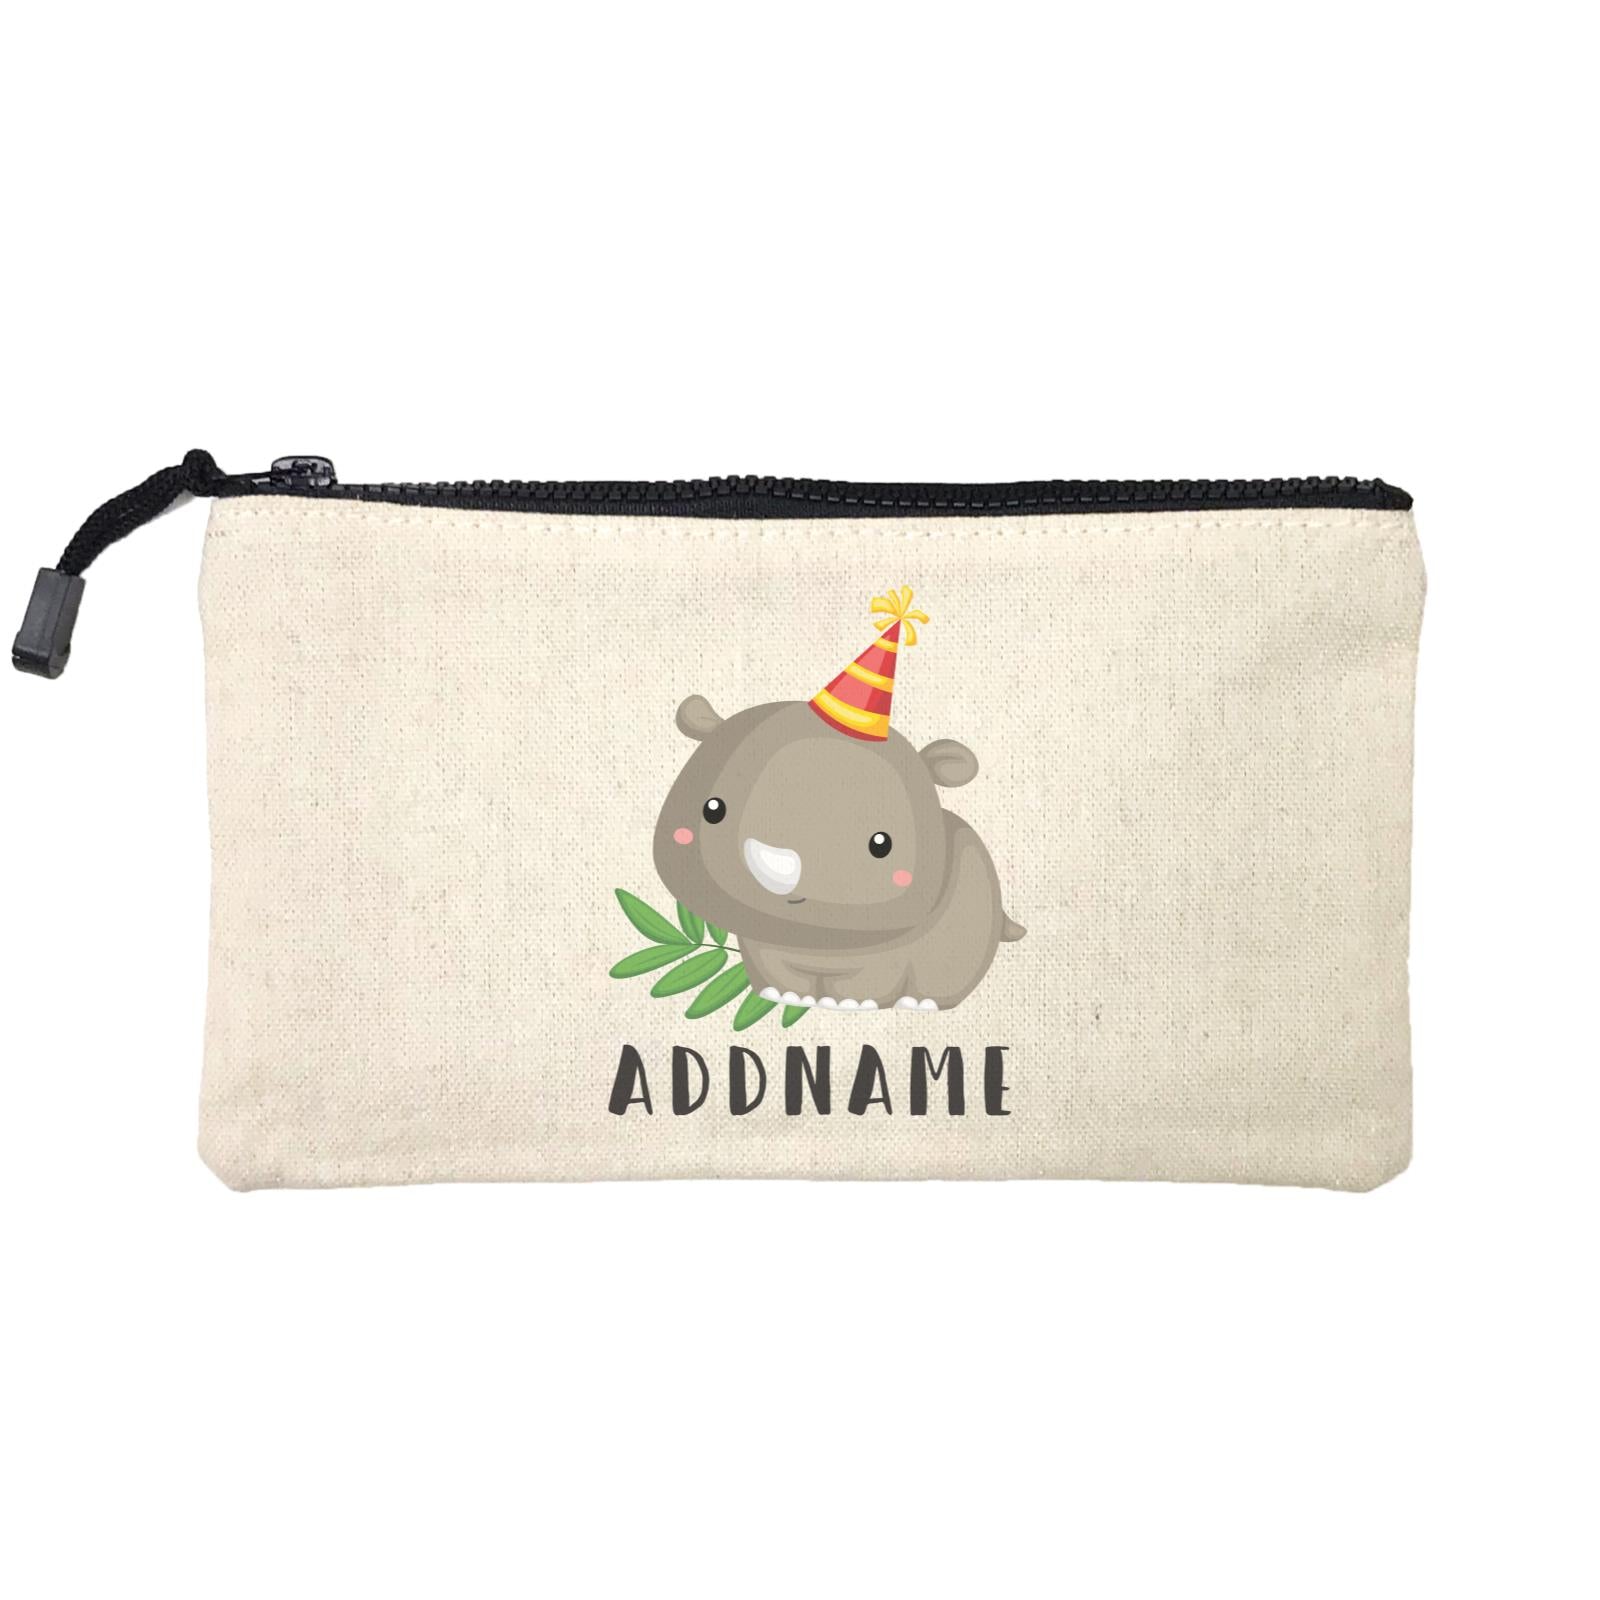 Birthday Safari Rhino Wearing Party Hat Addname Mini Accessories Stationery Pouch